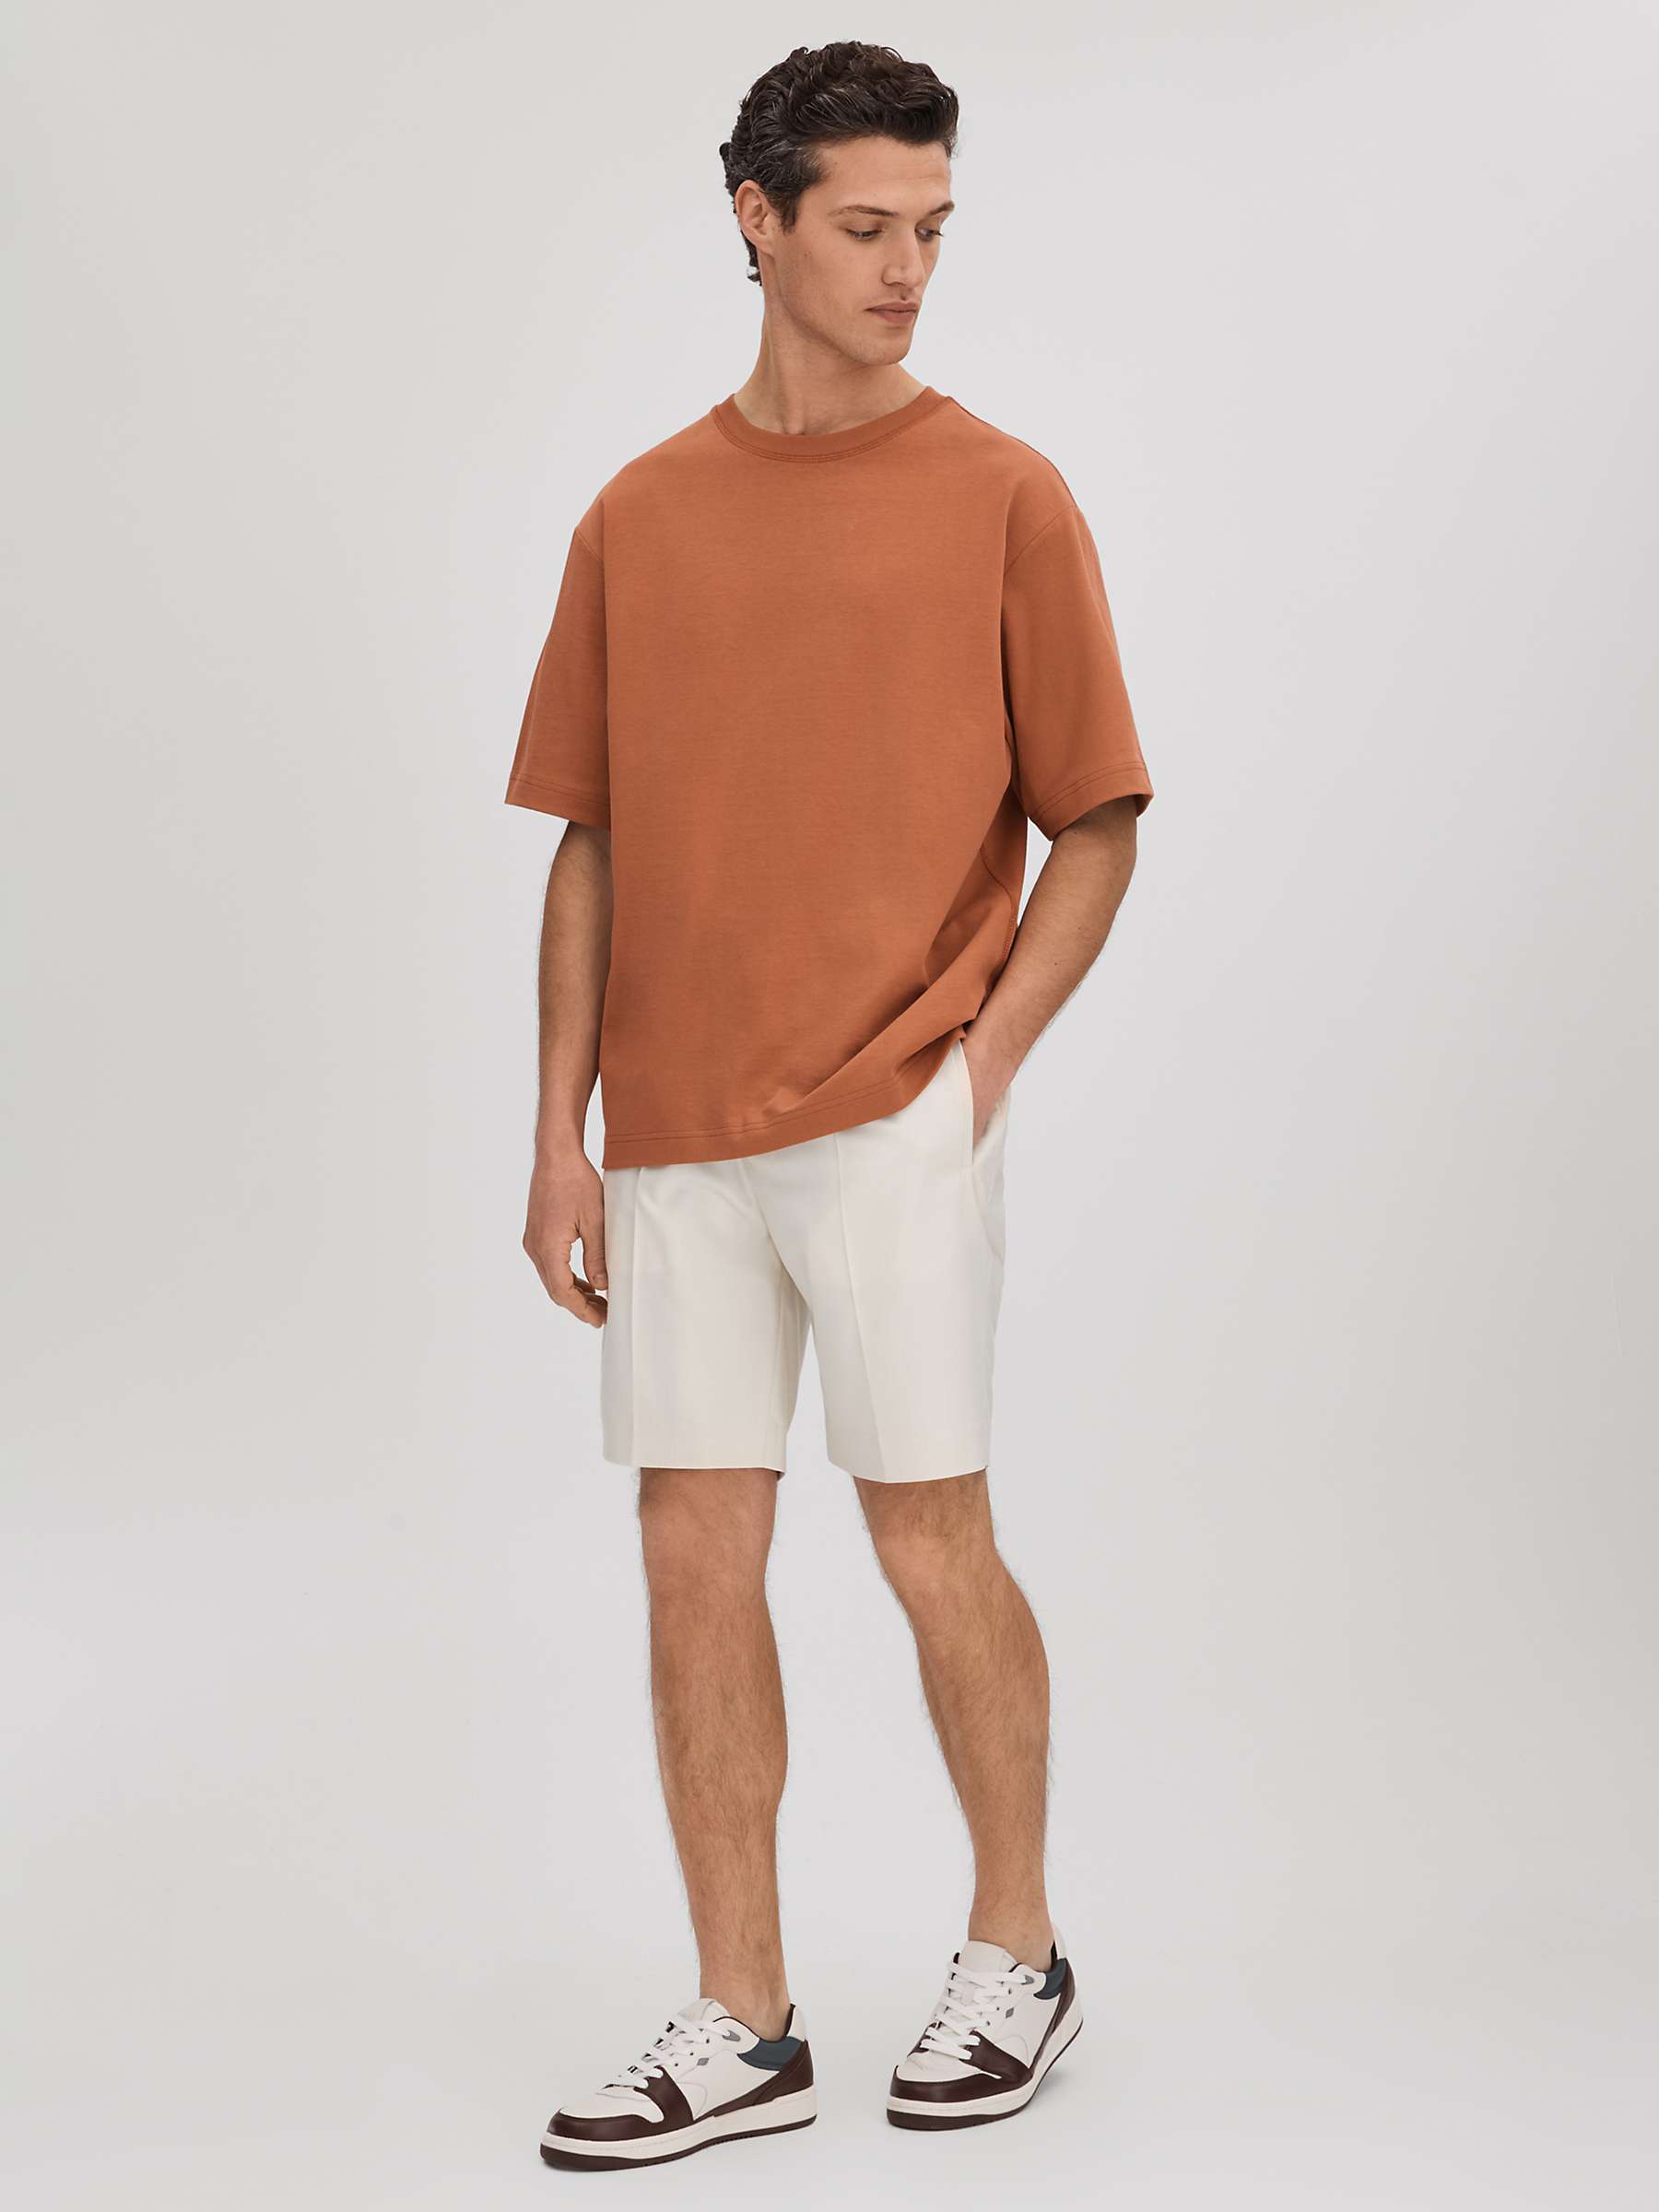 Buy Reiss Sussex Shorts Online at johnlewis.com